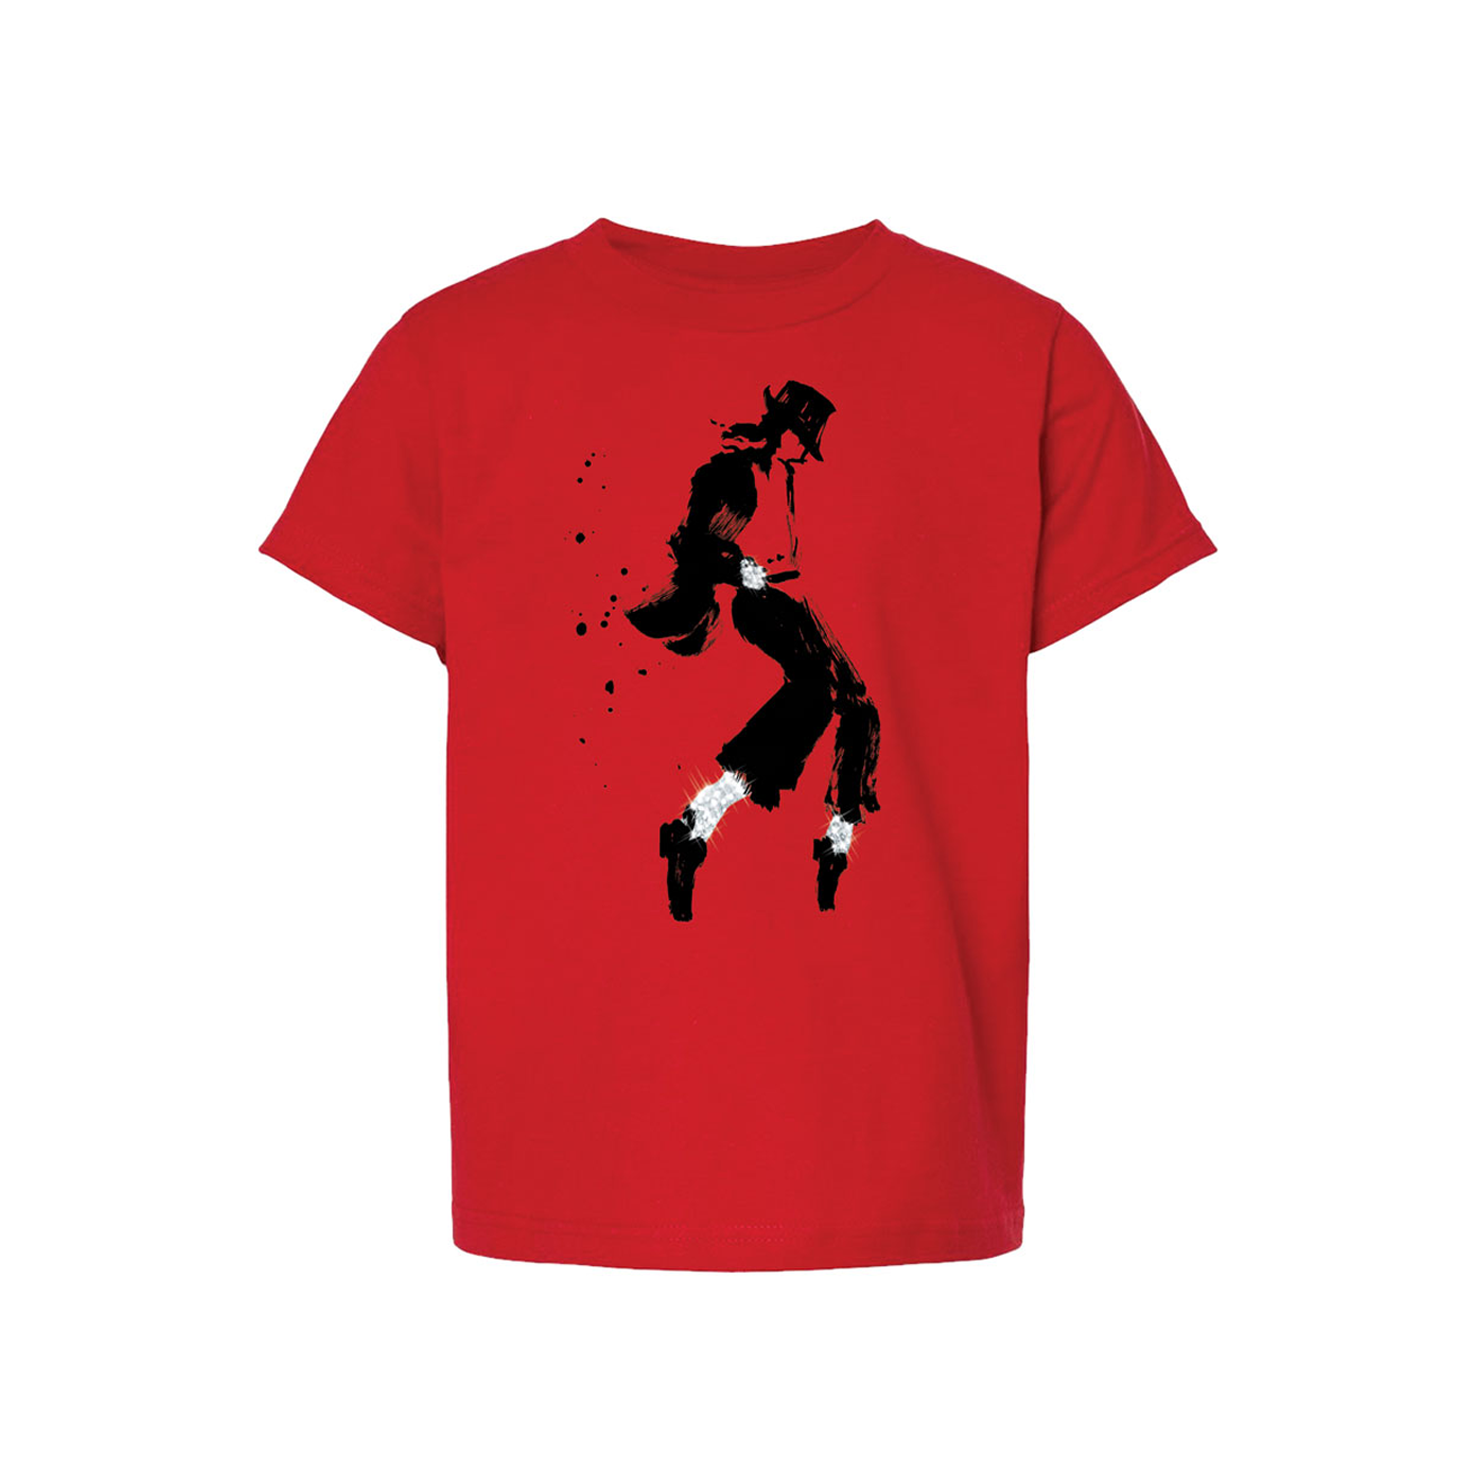 MJ THE MUSICAL Youth Logo Tee - Red Image